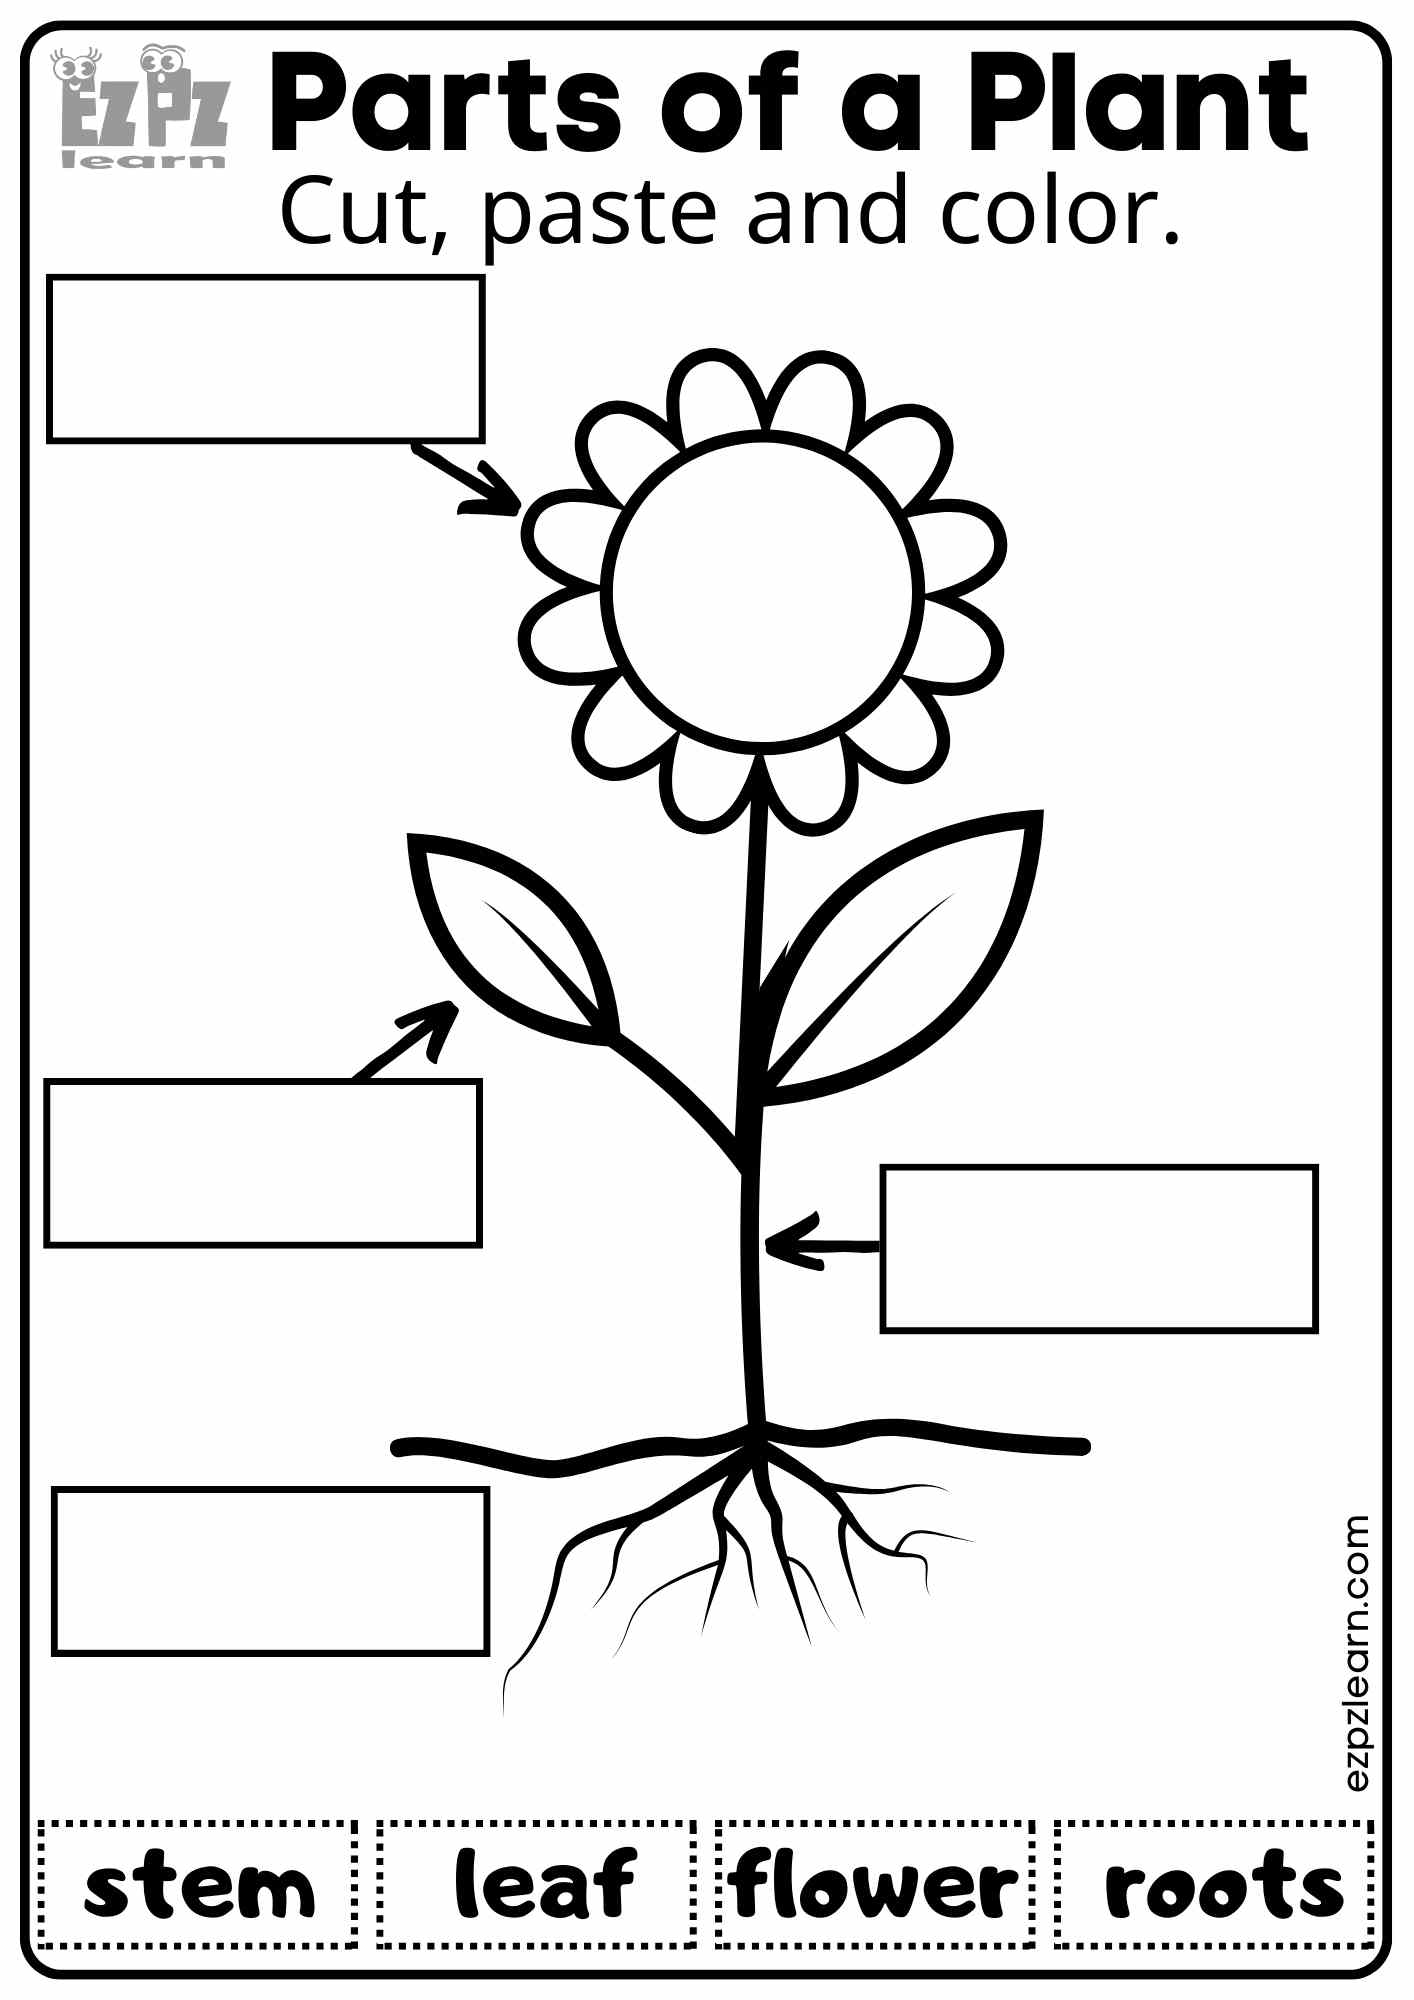 Parts of a Plant Vocabulary Worksheet Cut, Paste and Color Activity for ...